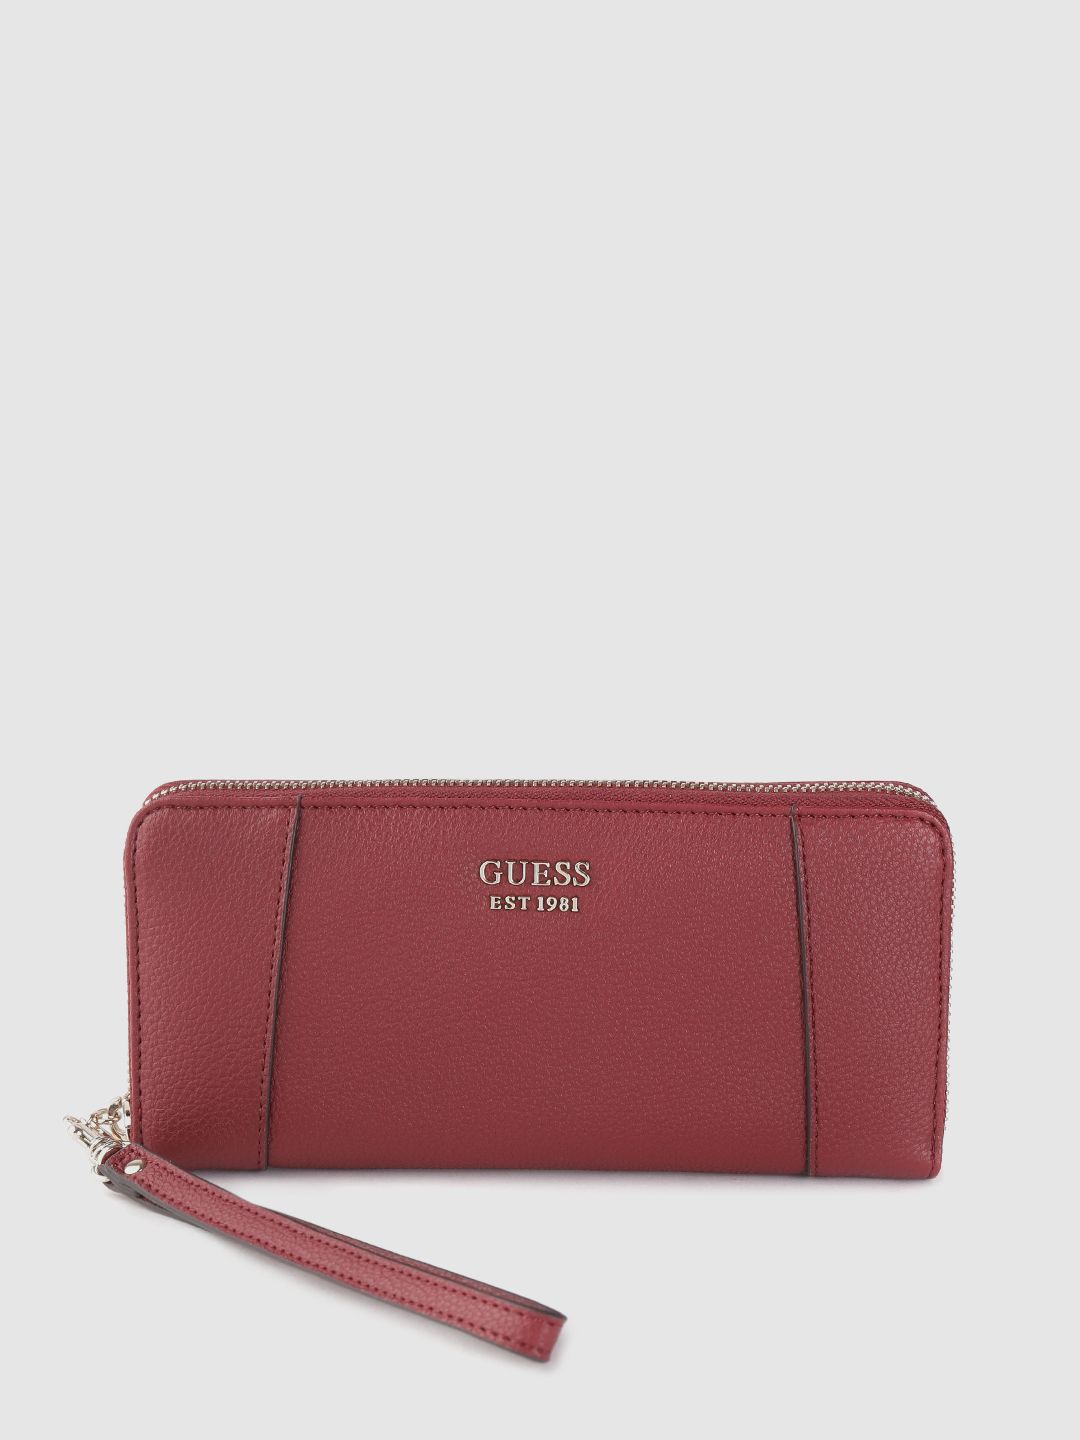 GUESS Women Maroon Solid Zip Around Wallet with Wrist loop Price in India